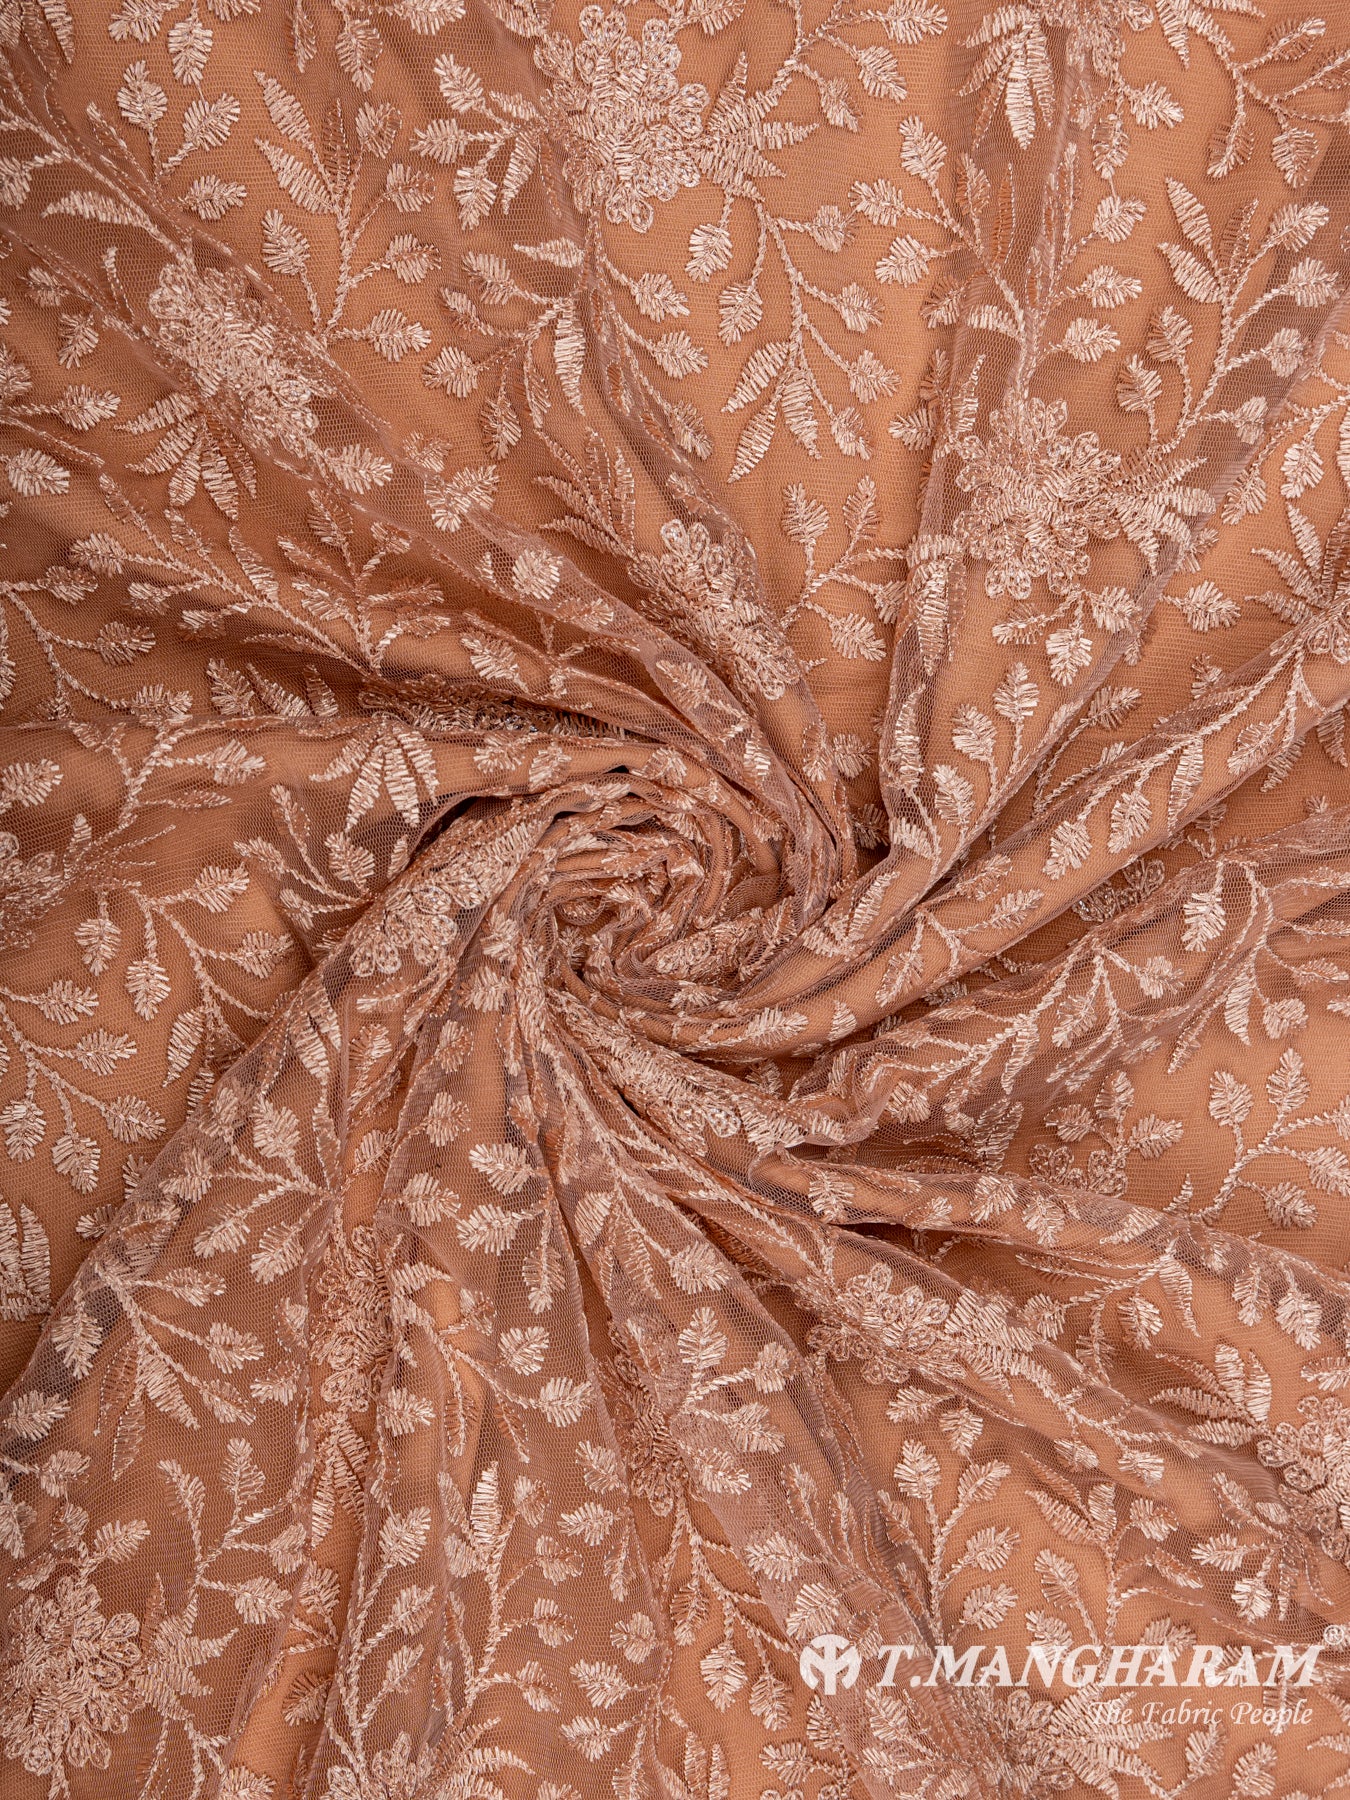 Peach Net Embroidery Fabric - EC6547 view-1